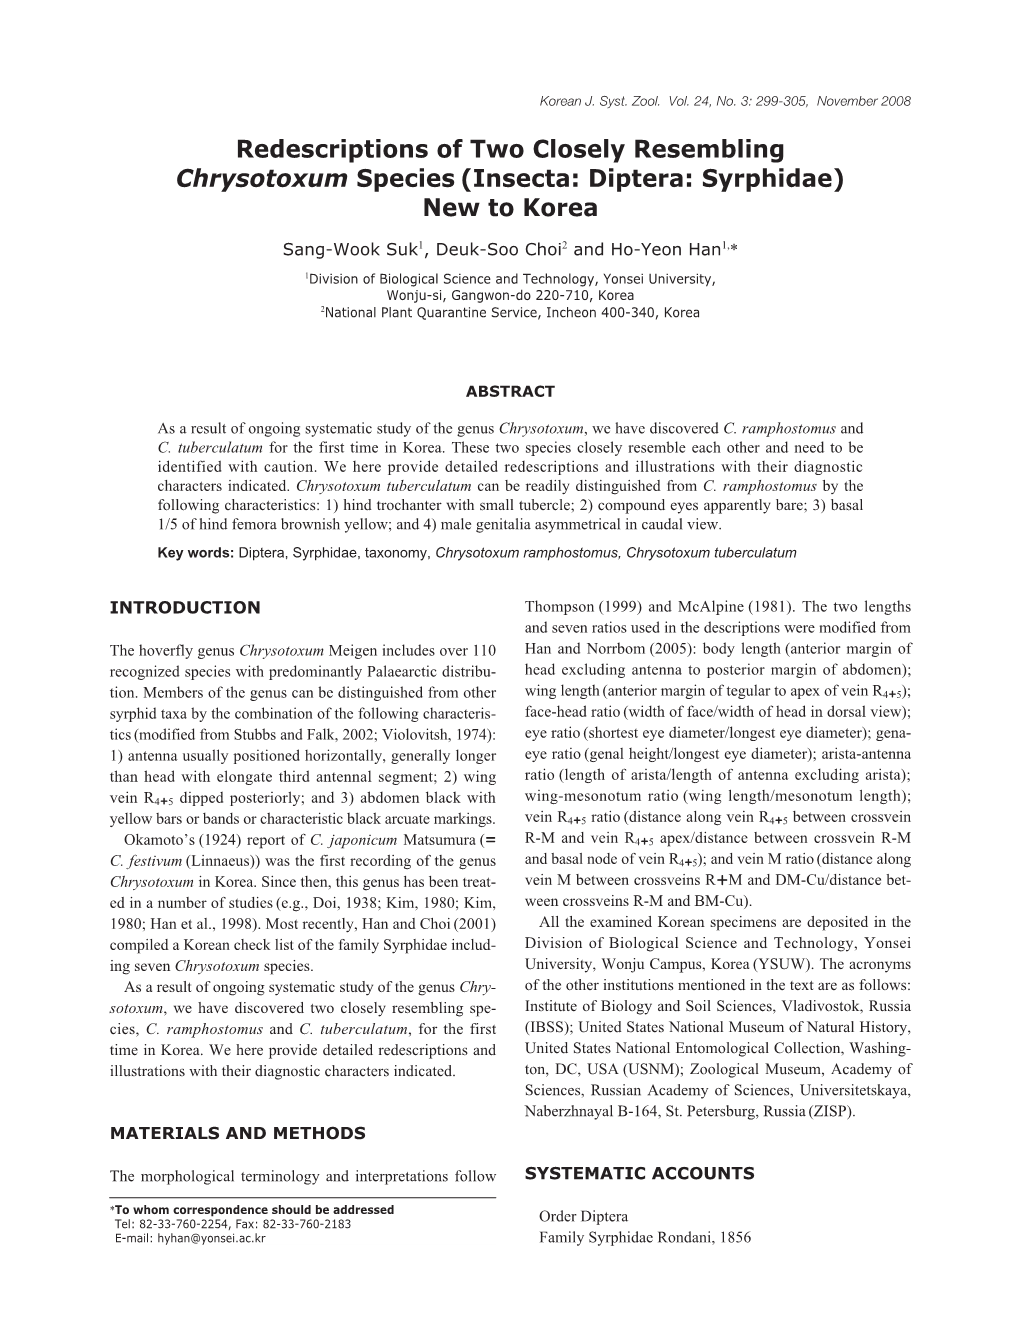 Redescriptions of Two Closely Resembling Chrysotoxum Species (Insecta: Diptera: Syrphidae) New to Korea